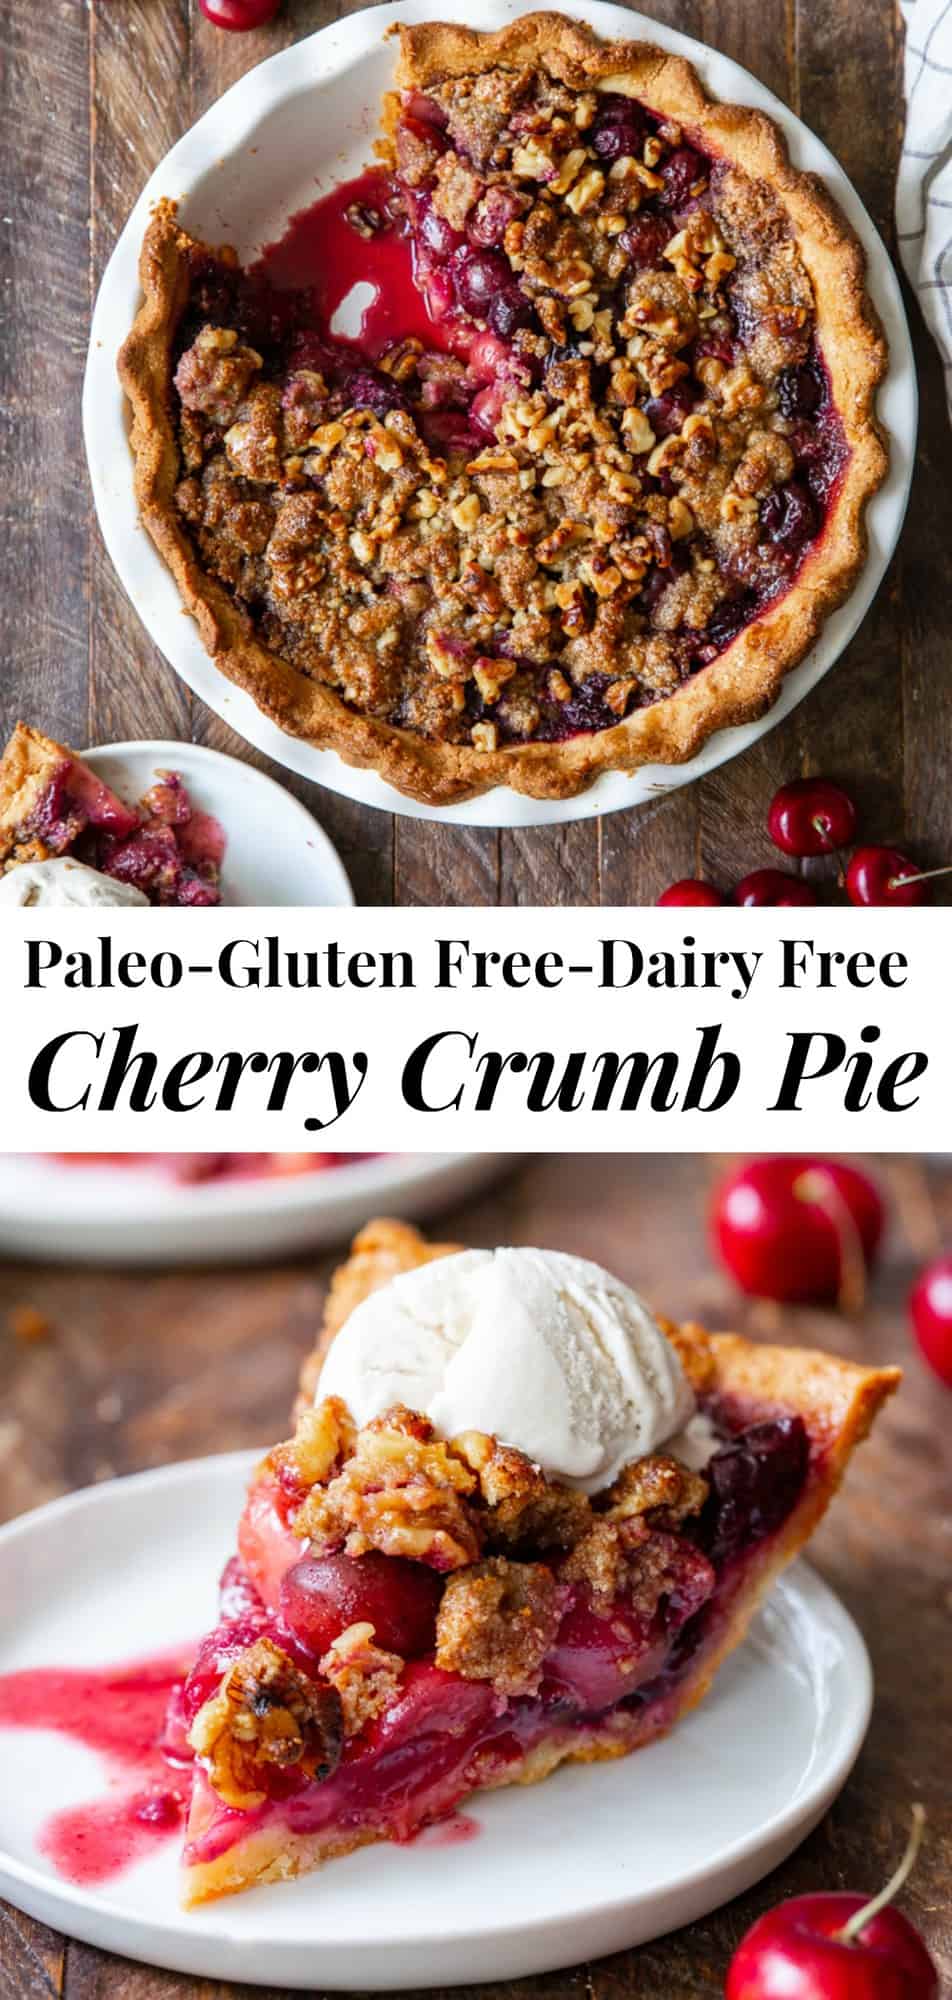 The crumb topping on this juicy sweet cherry crumble pie not only gives it a nutty crunch, it makes it super easy to make since there’s only a bottom crust to work with. Make this paleo dessert a la mode with some coconut vanilla ice cream and watch everyone swoon! #paleo #cherrypie #cleaneating #glutenfree #grainfree 